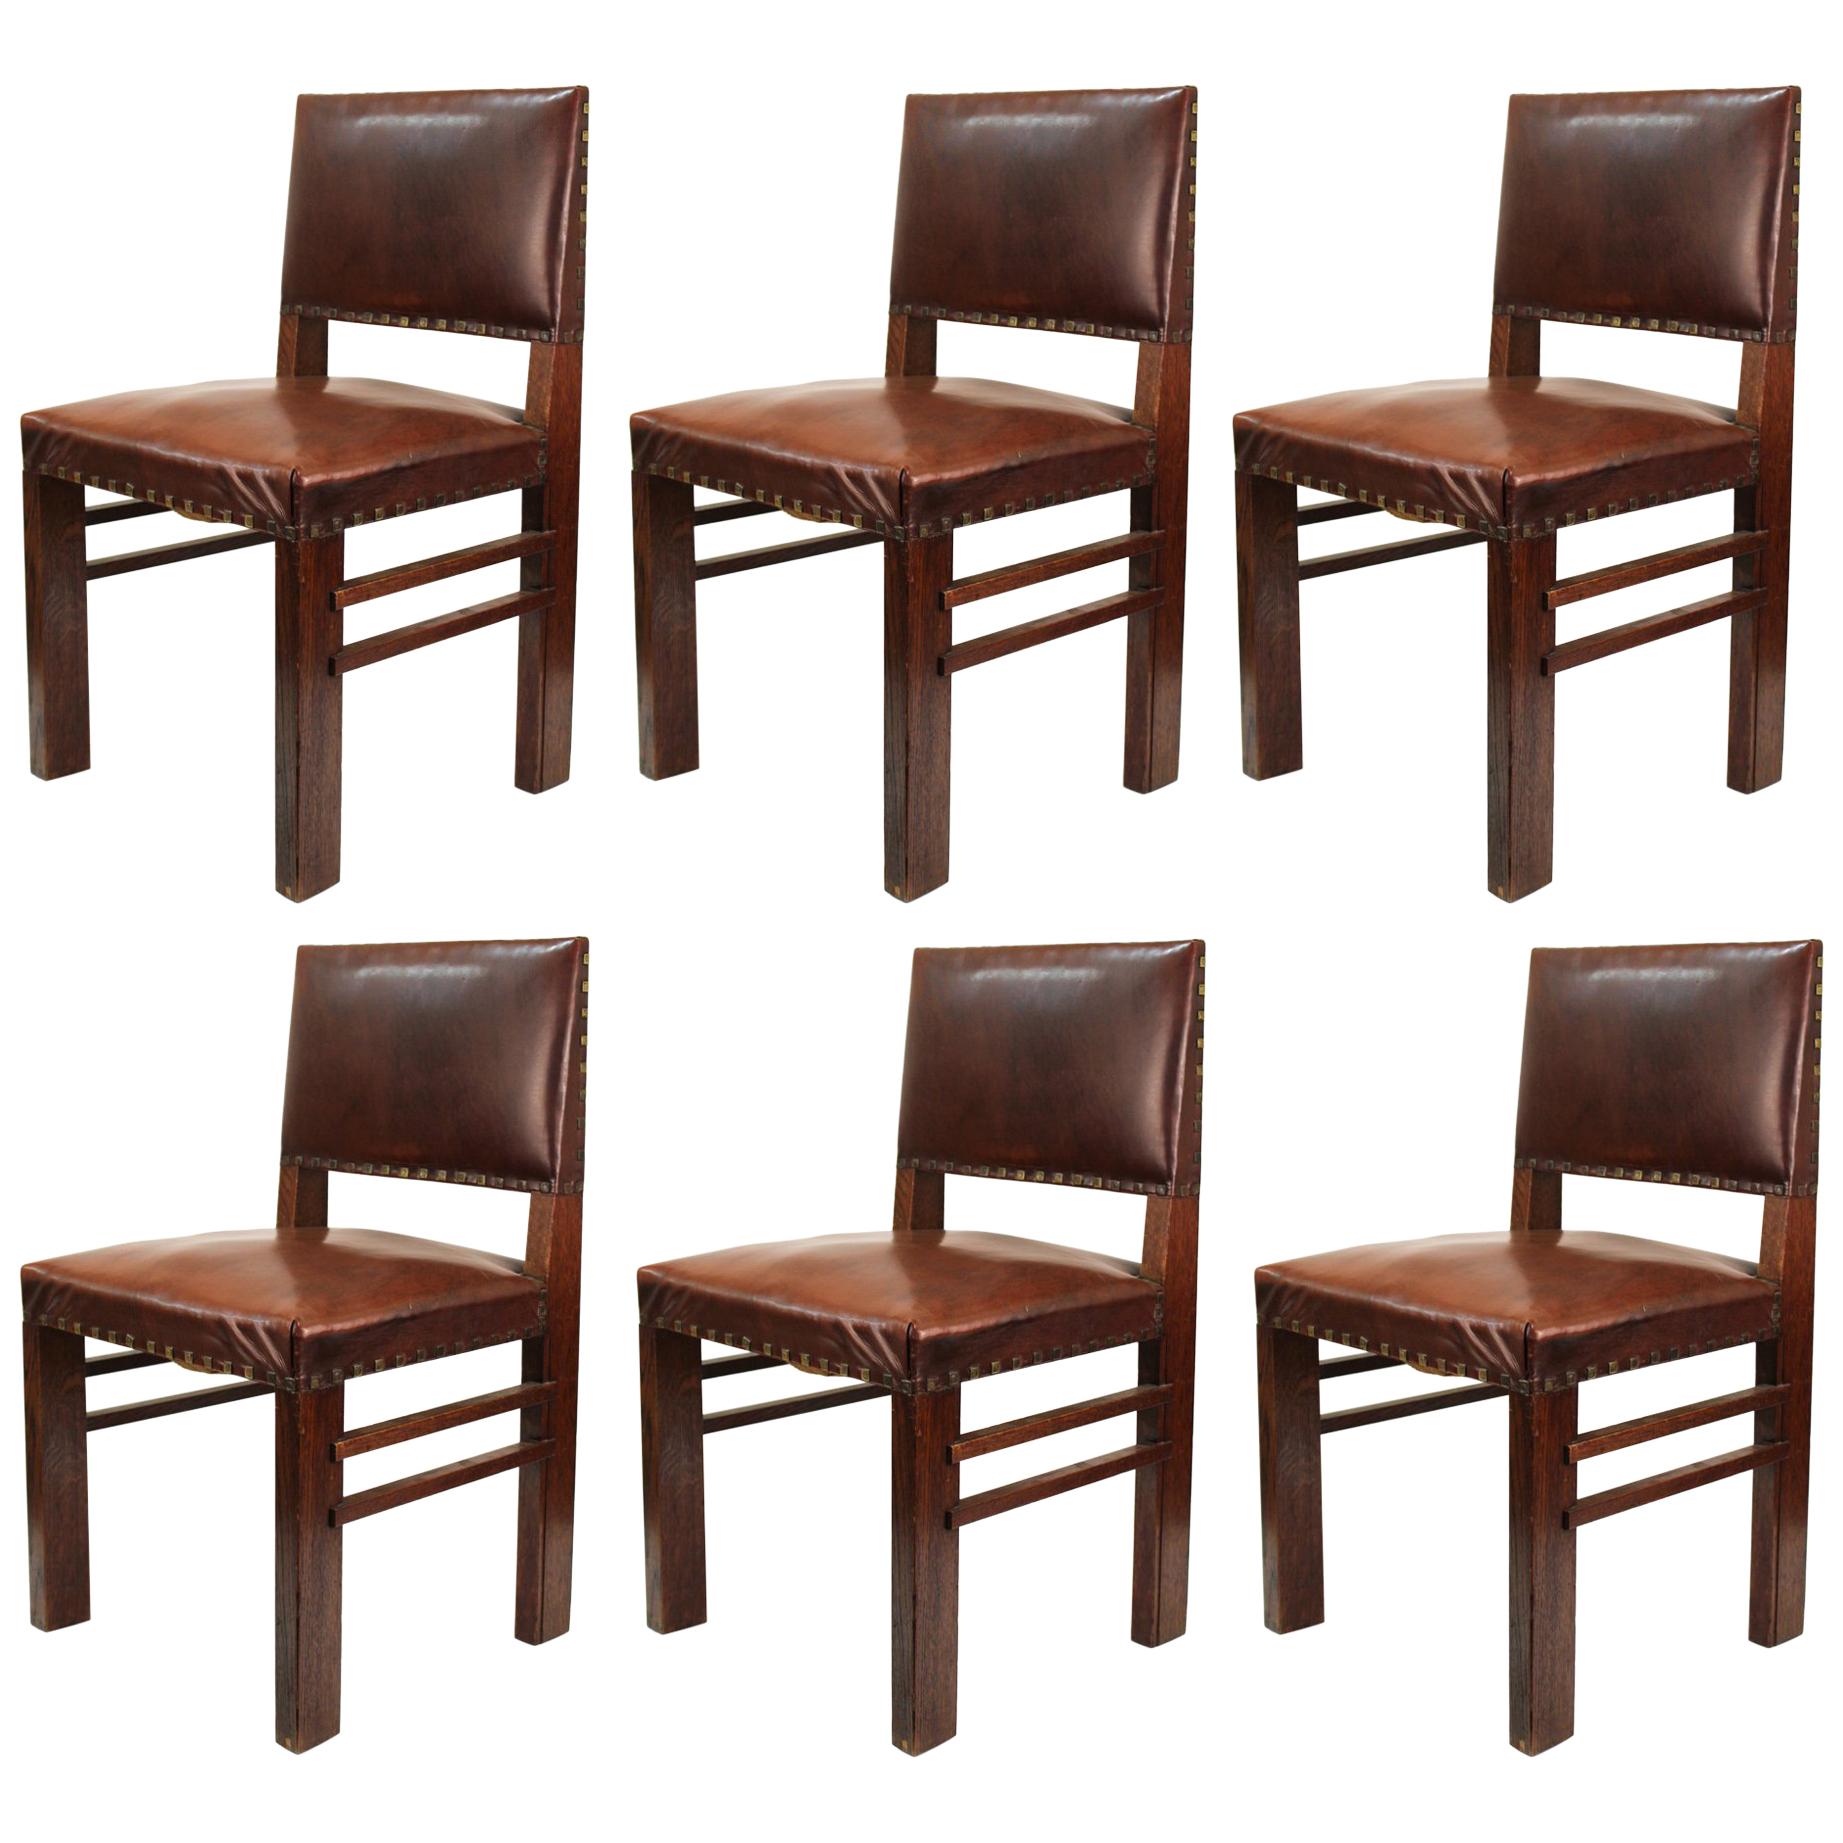 American Arts & Crafts Oak Chairs with Cognac Colored Leather Seats For Sale